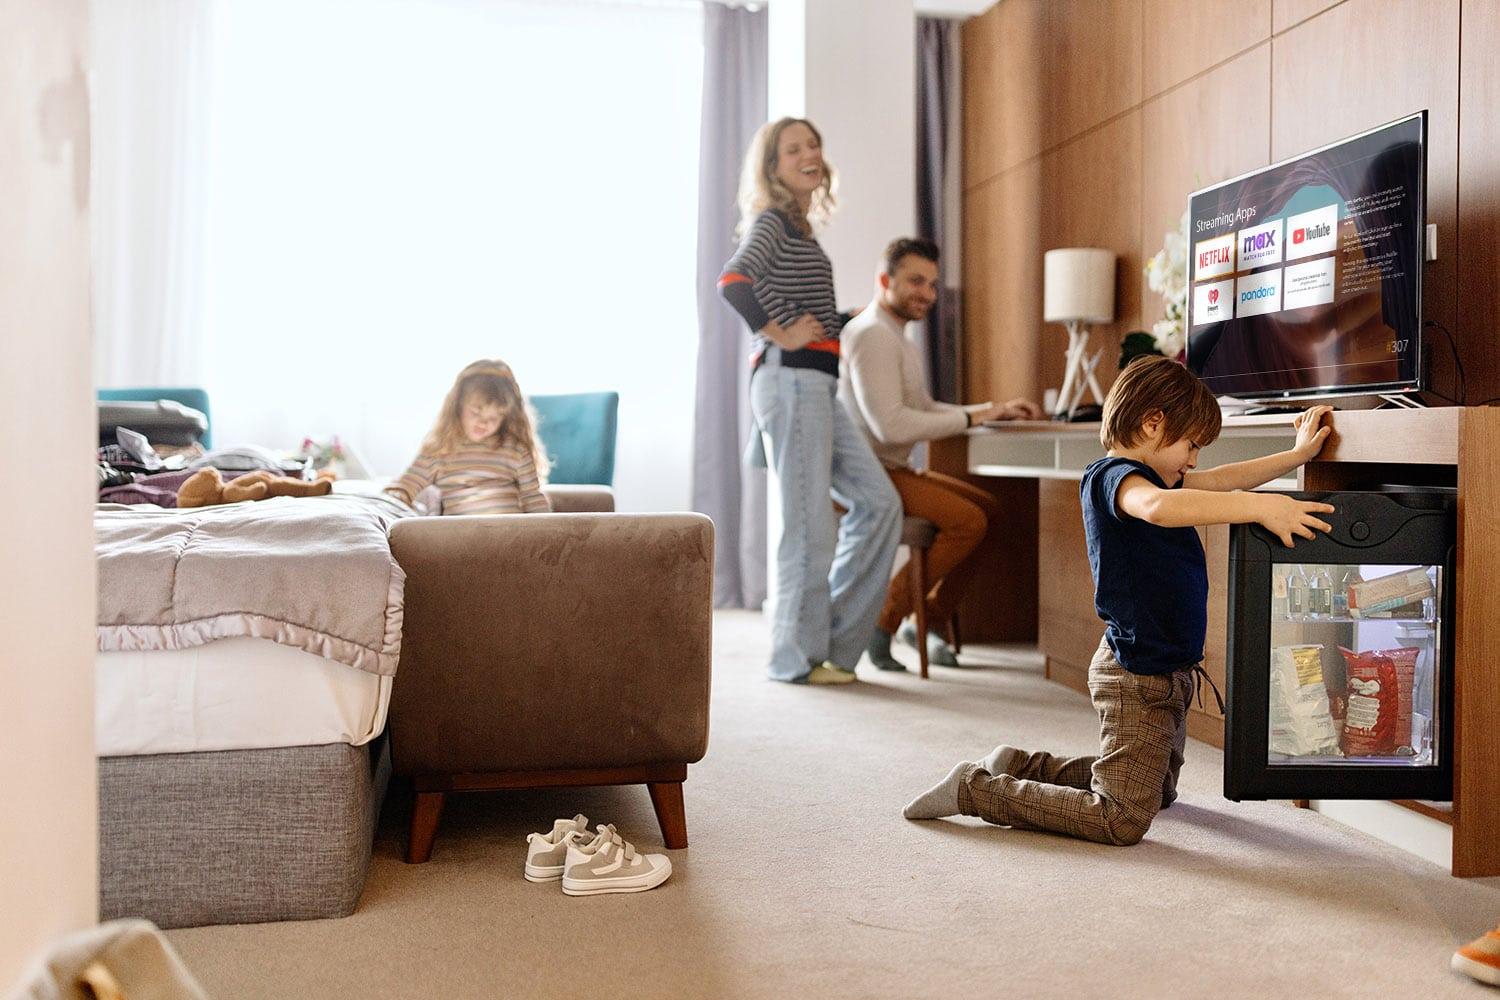 This image shows two children and two adults in a hotel room. One child opens a mini-fridge, a person works at a desk, and both overlook the kids.